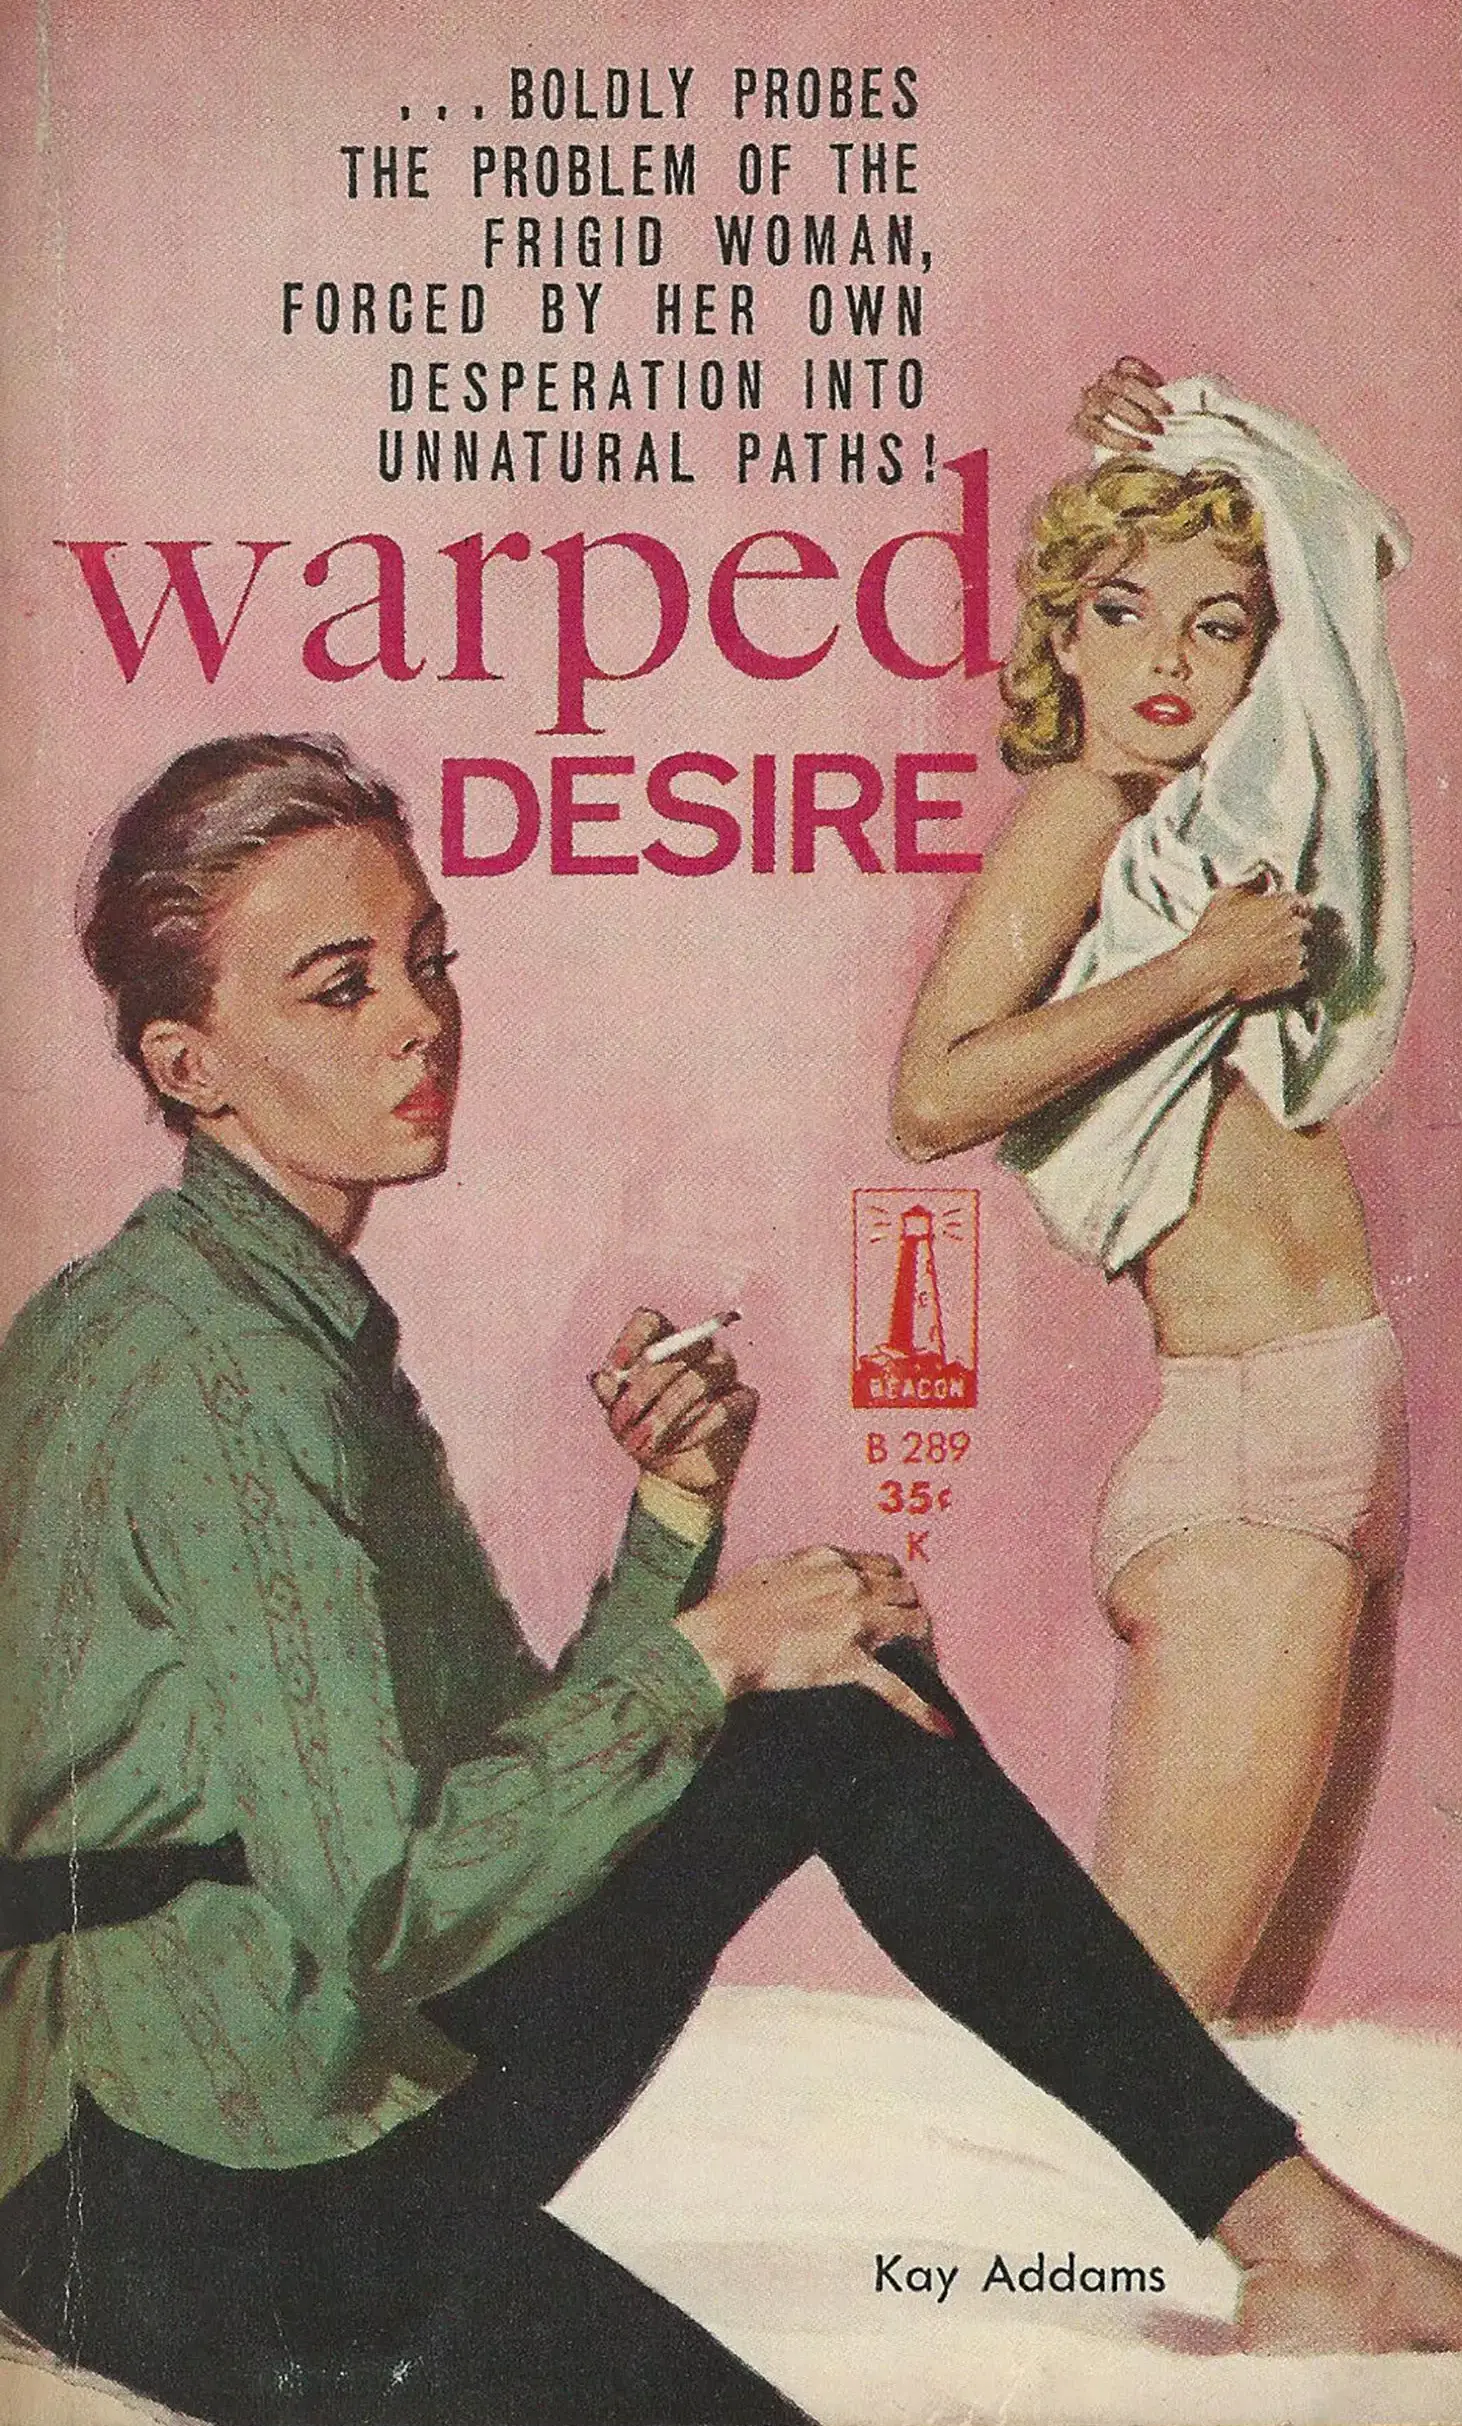 In the background of the bookcover, a woman is undressing, her curly hair is down. In the foreground, presumably the same woman is seated, her hair tied up and wearing a shirt, smoking a cigarette. The cover is titled “Warped Desire” and subtitled “...boldly probes the problem of the frigid woman, forced by her own desperation into unnatural paths.”